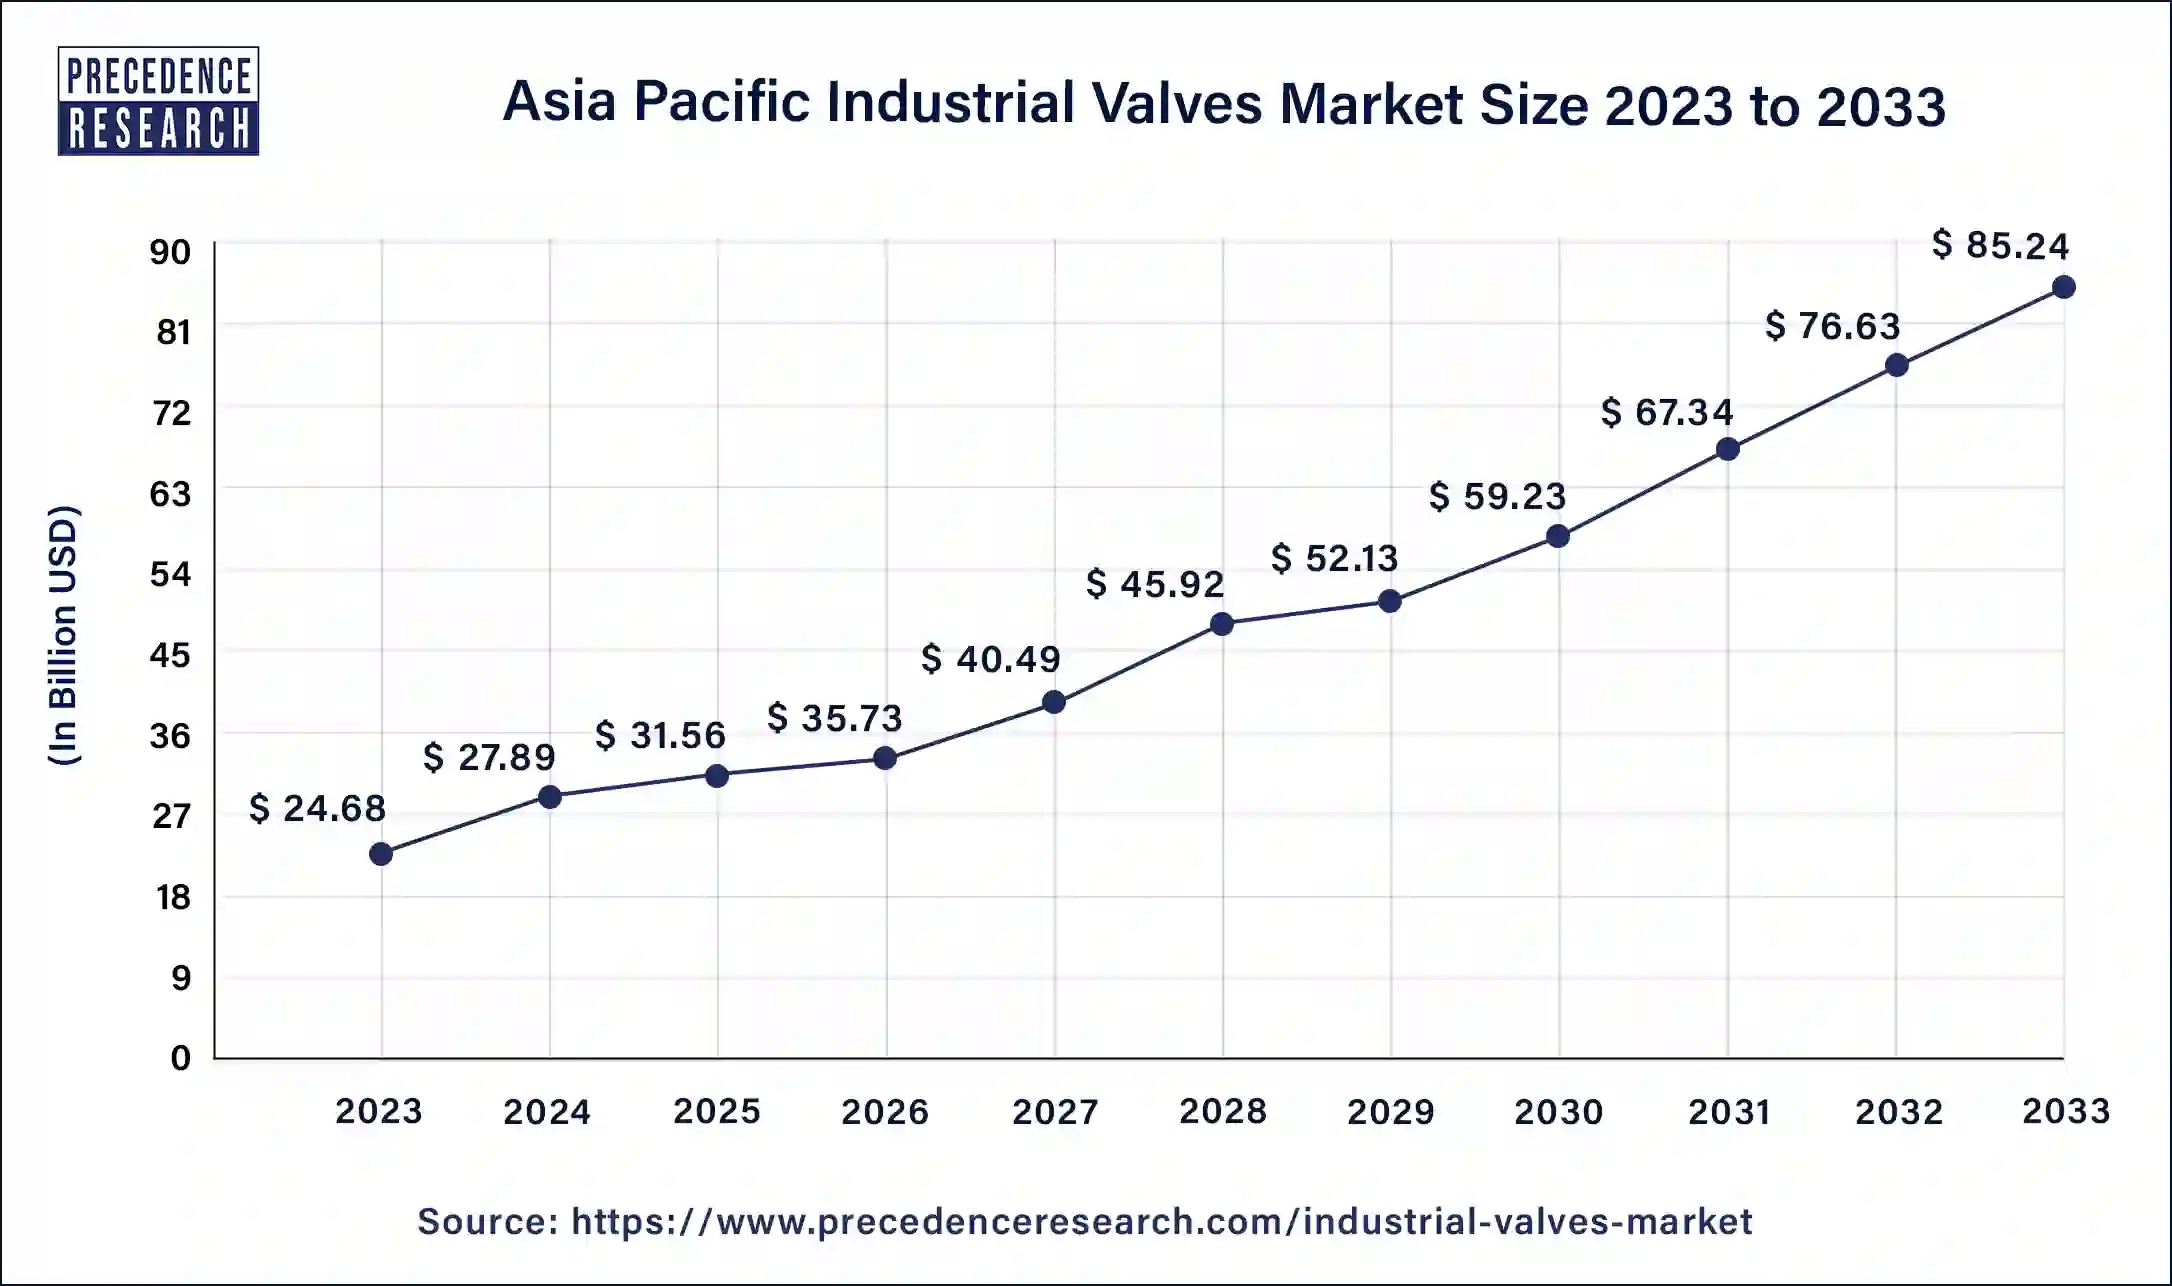 Asia Pacific Industrial Valves Market Size 2024 to 2033